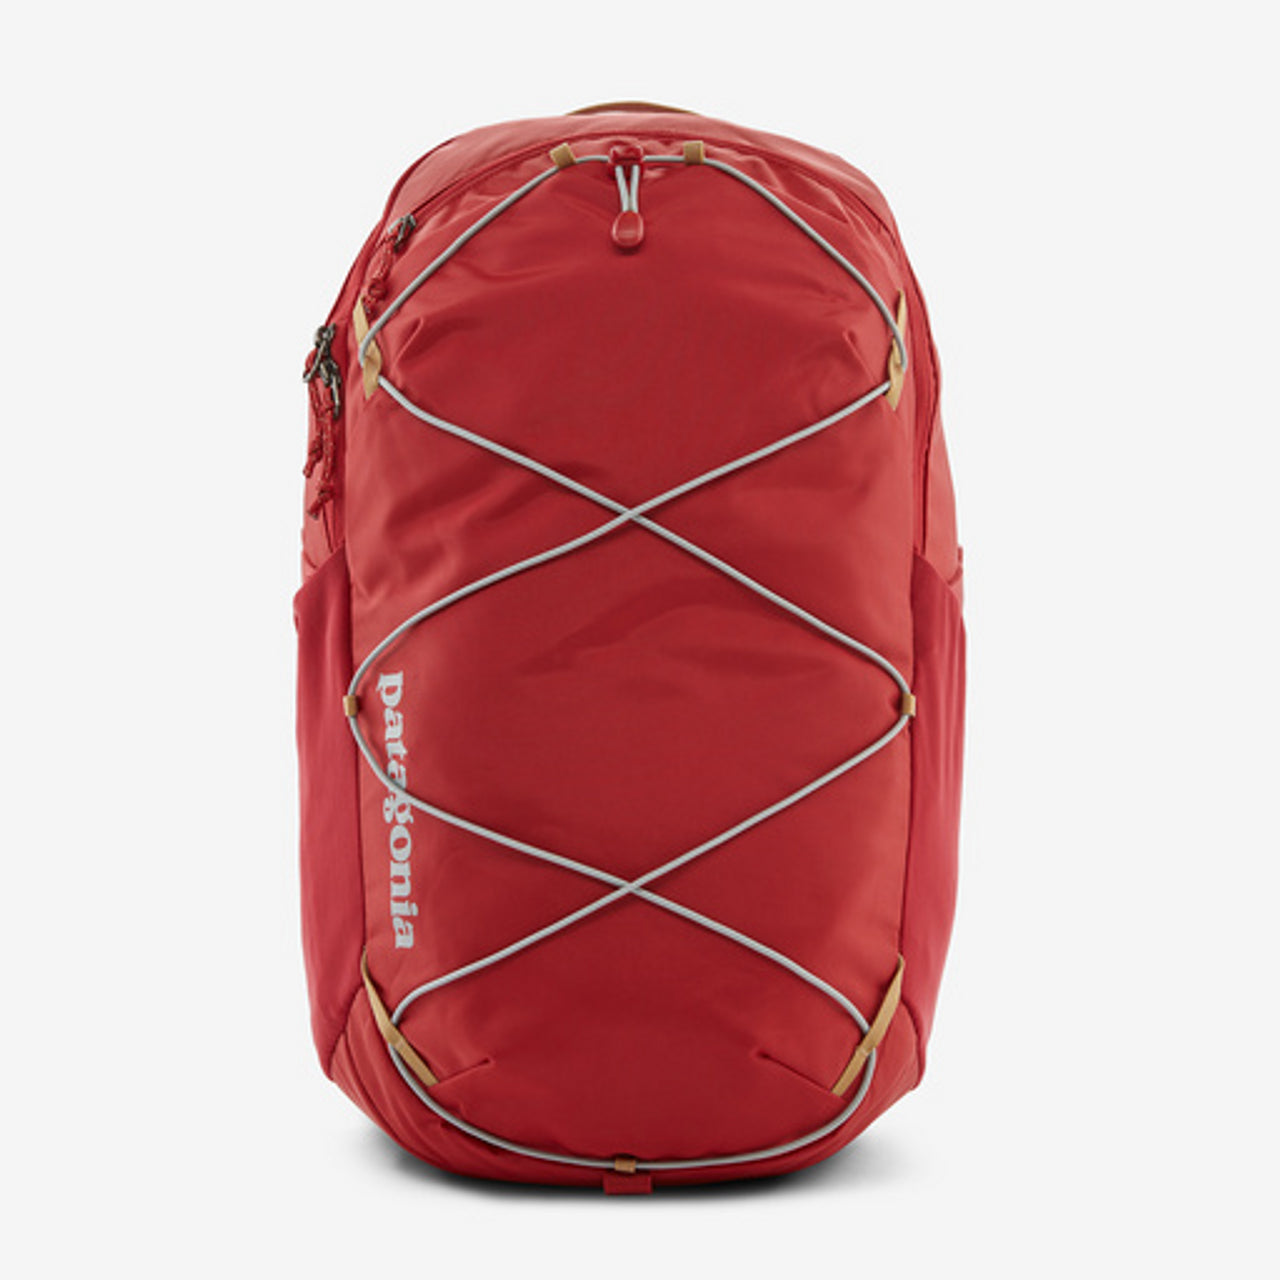 REFUGIO DAY PACK 30L - TOURING RED